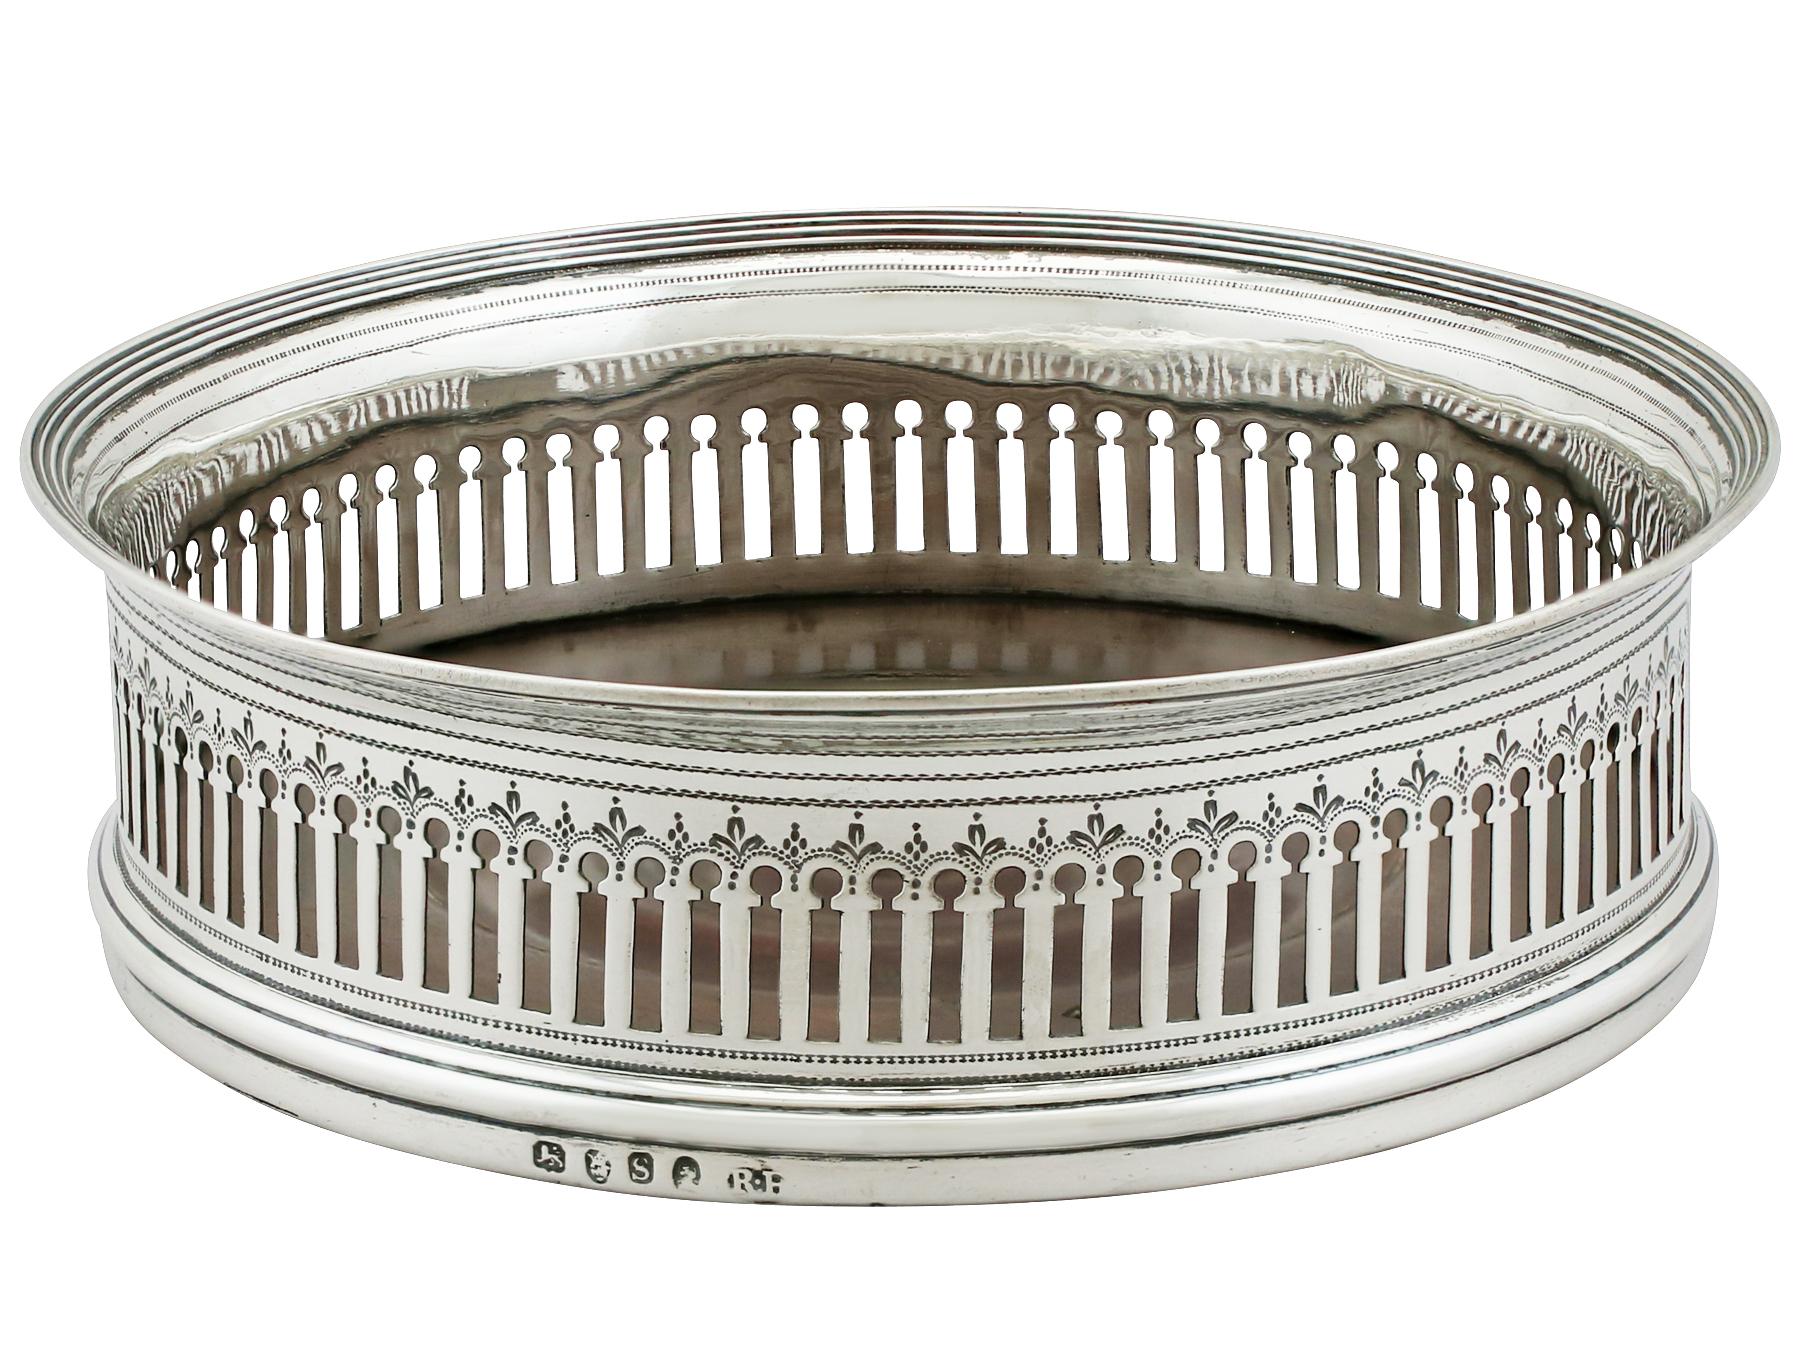 An exceptional, fine and impressive antique George III English sterling silver coaster; an addition to our Georgian silverware collection.

This exceptional antique George III sterling silver wine coaster has a cylindrical form with a rounded